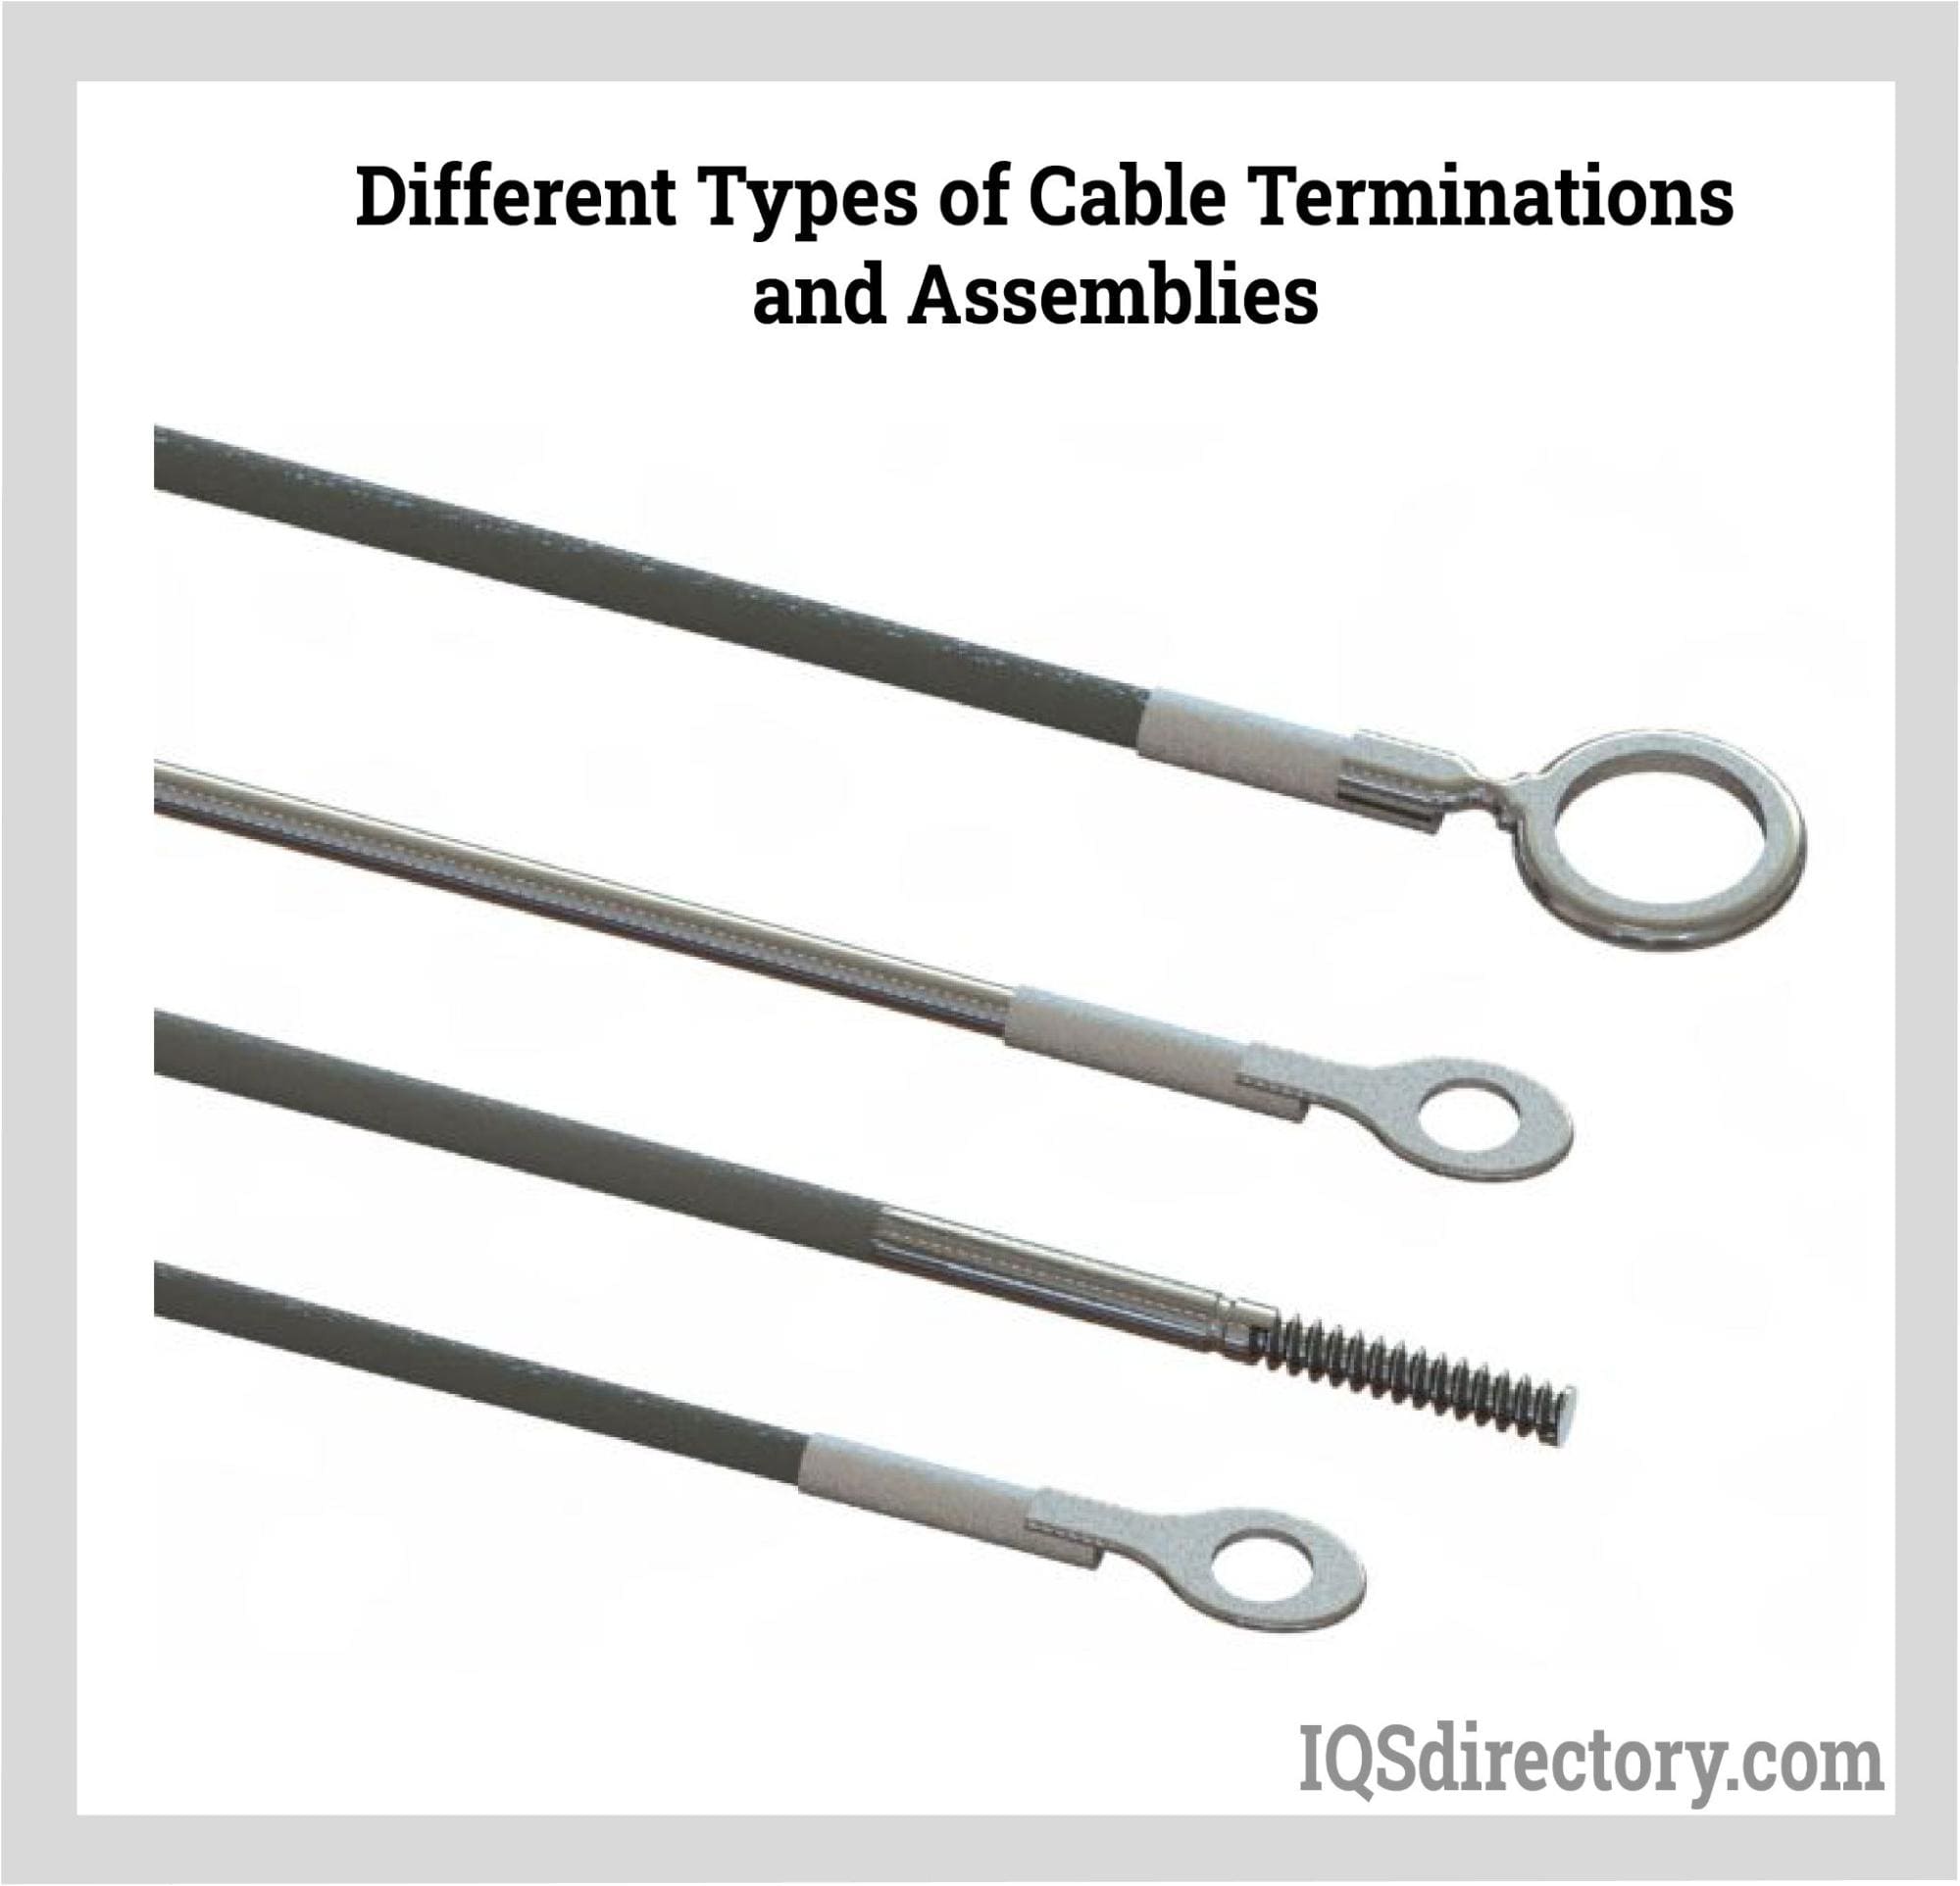 Different Types of Cable Terminations and Assemblies